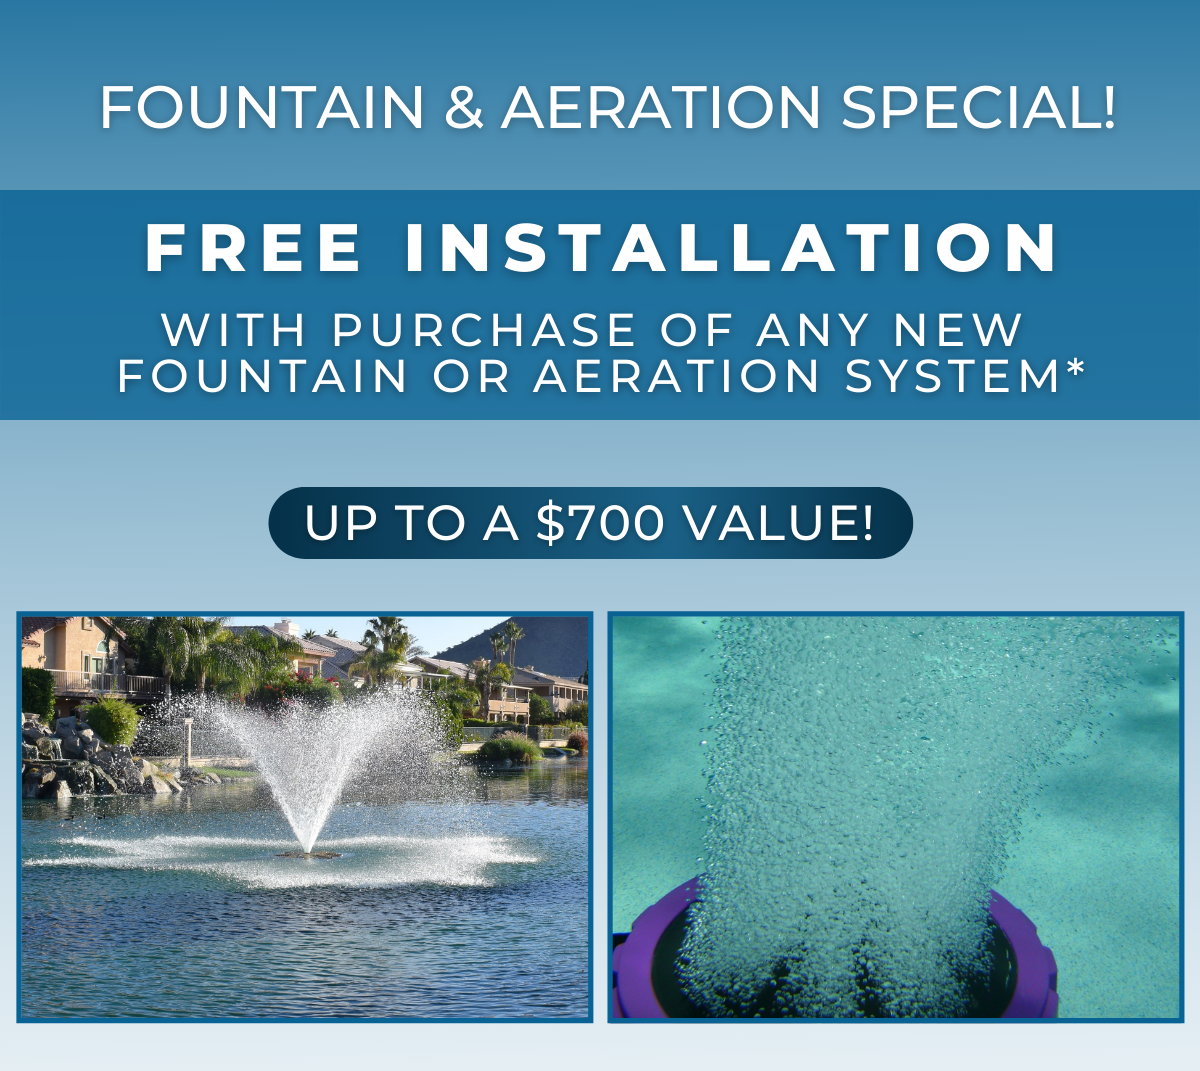 Exciting Fountain & Aeration Deal Won’t Last! Time is running out on our amazing offer… By SOLitude